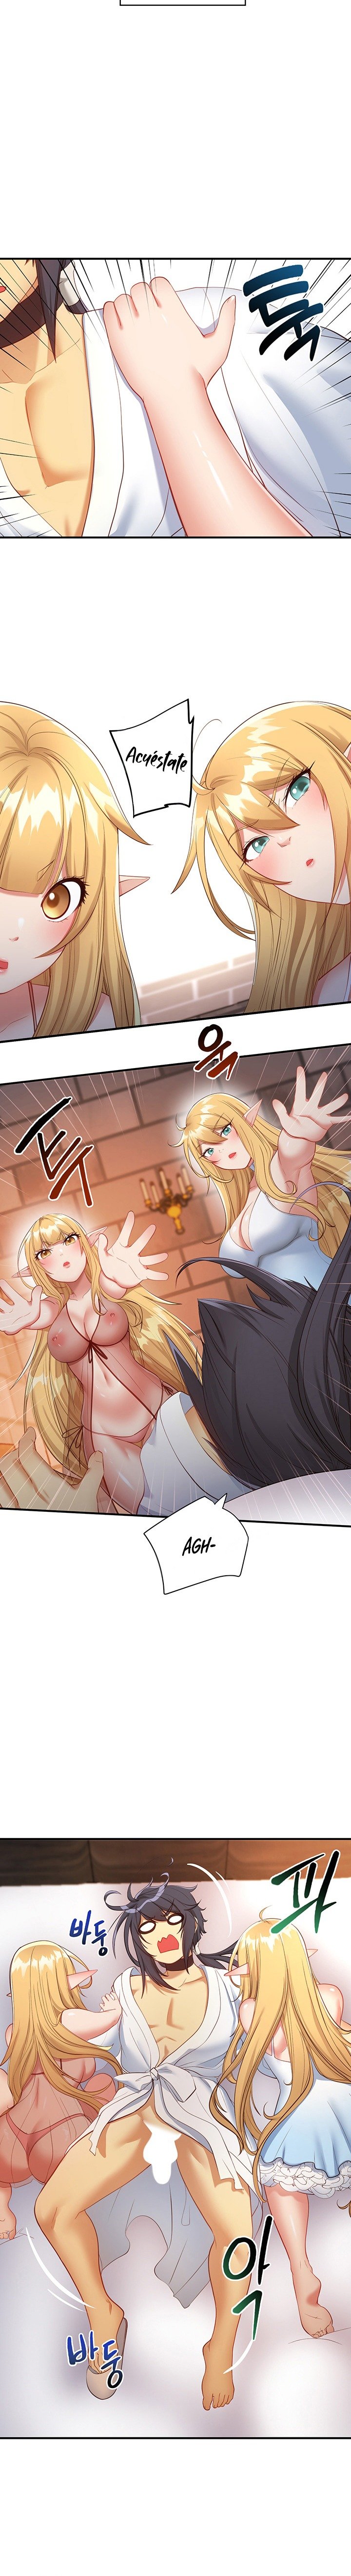 slave-knight-of-the-elf-raw-chap-39-7